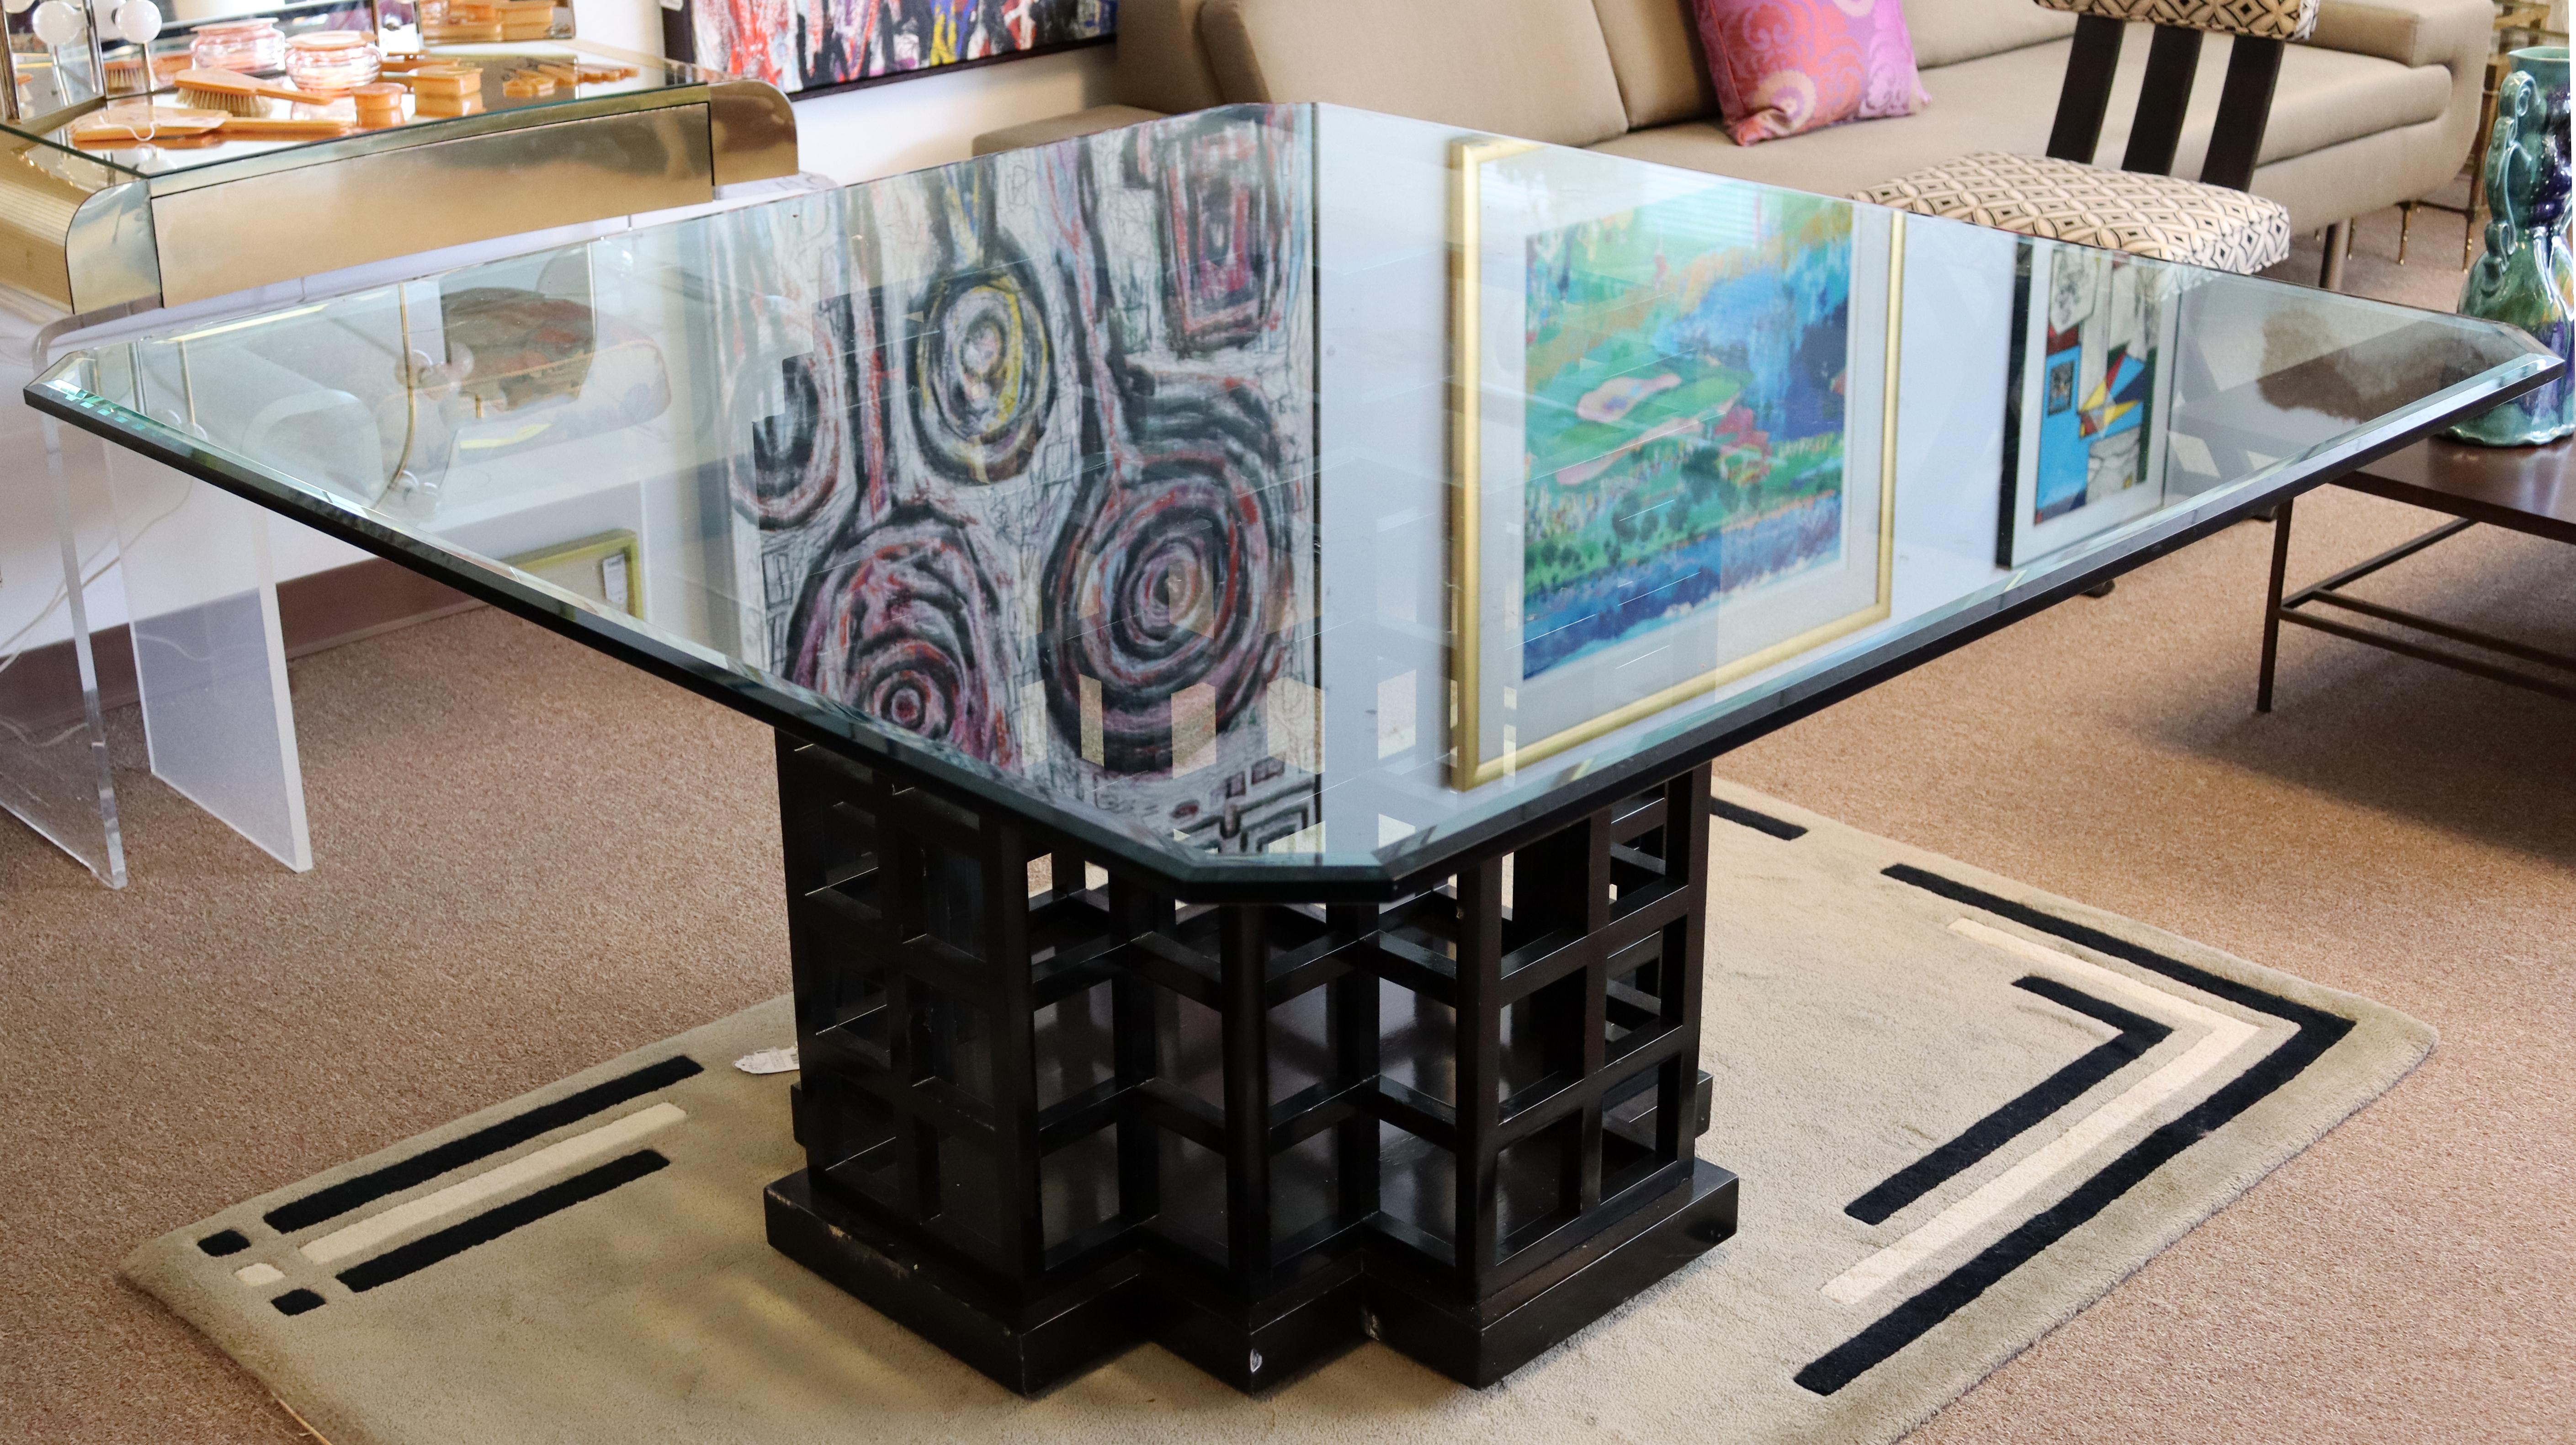 For your consideration is a magnificent and massive dining table, with a geometric patterned cube wood base and a square glass top, by Dakota Jackson, circa the 1990s. In very good condition, but with a few nicks in the wood. The dimensions are 60